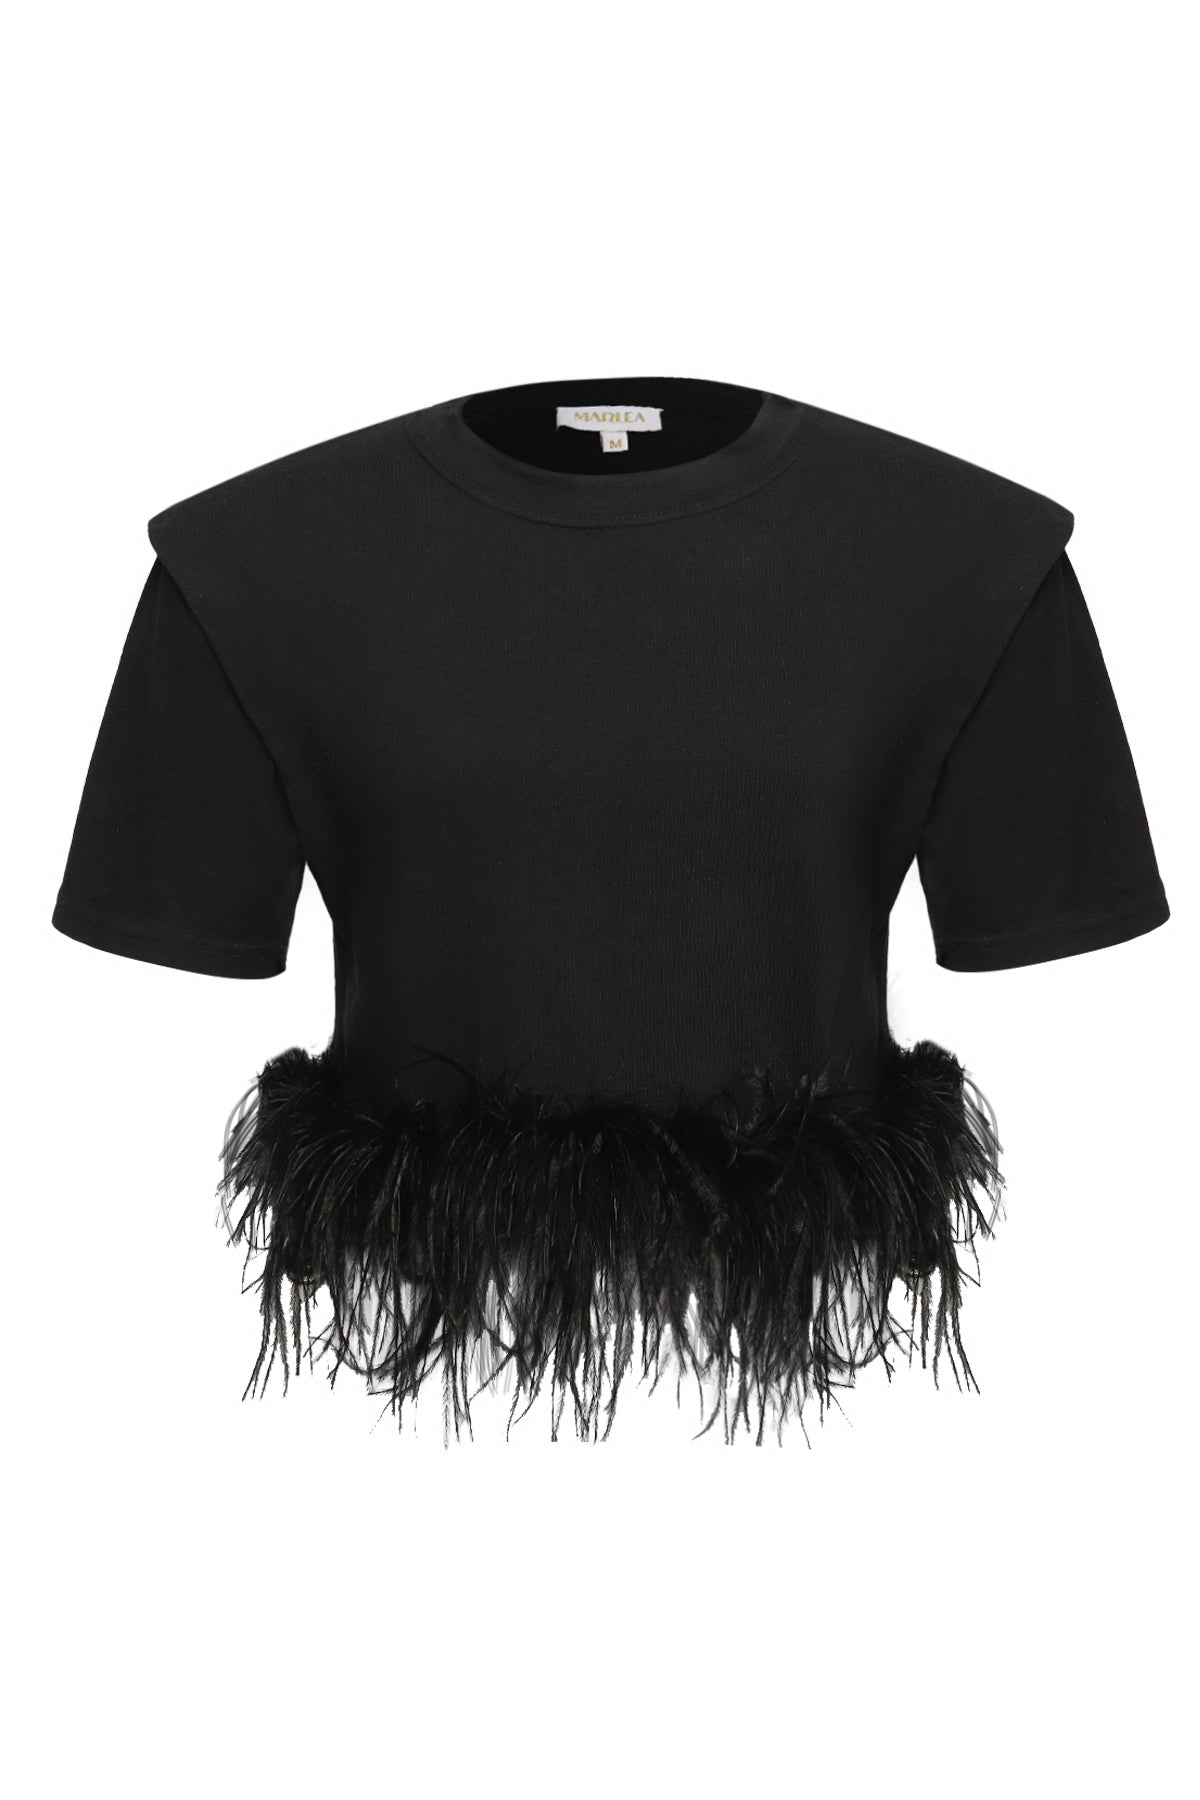 FEATHERS T-SHIRT - BLACK